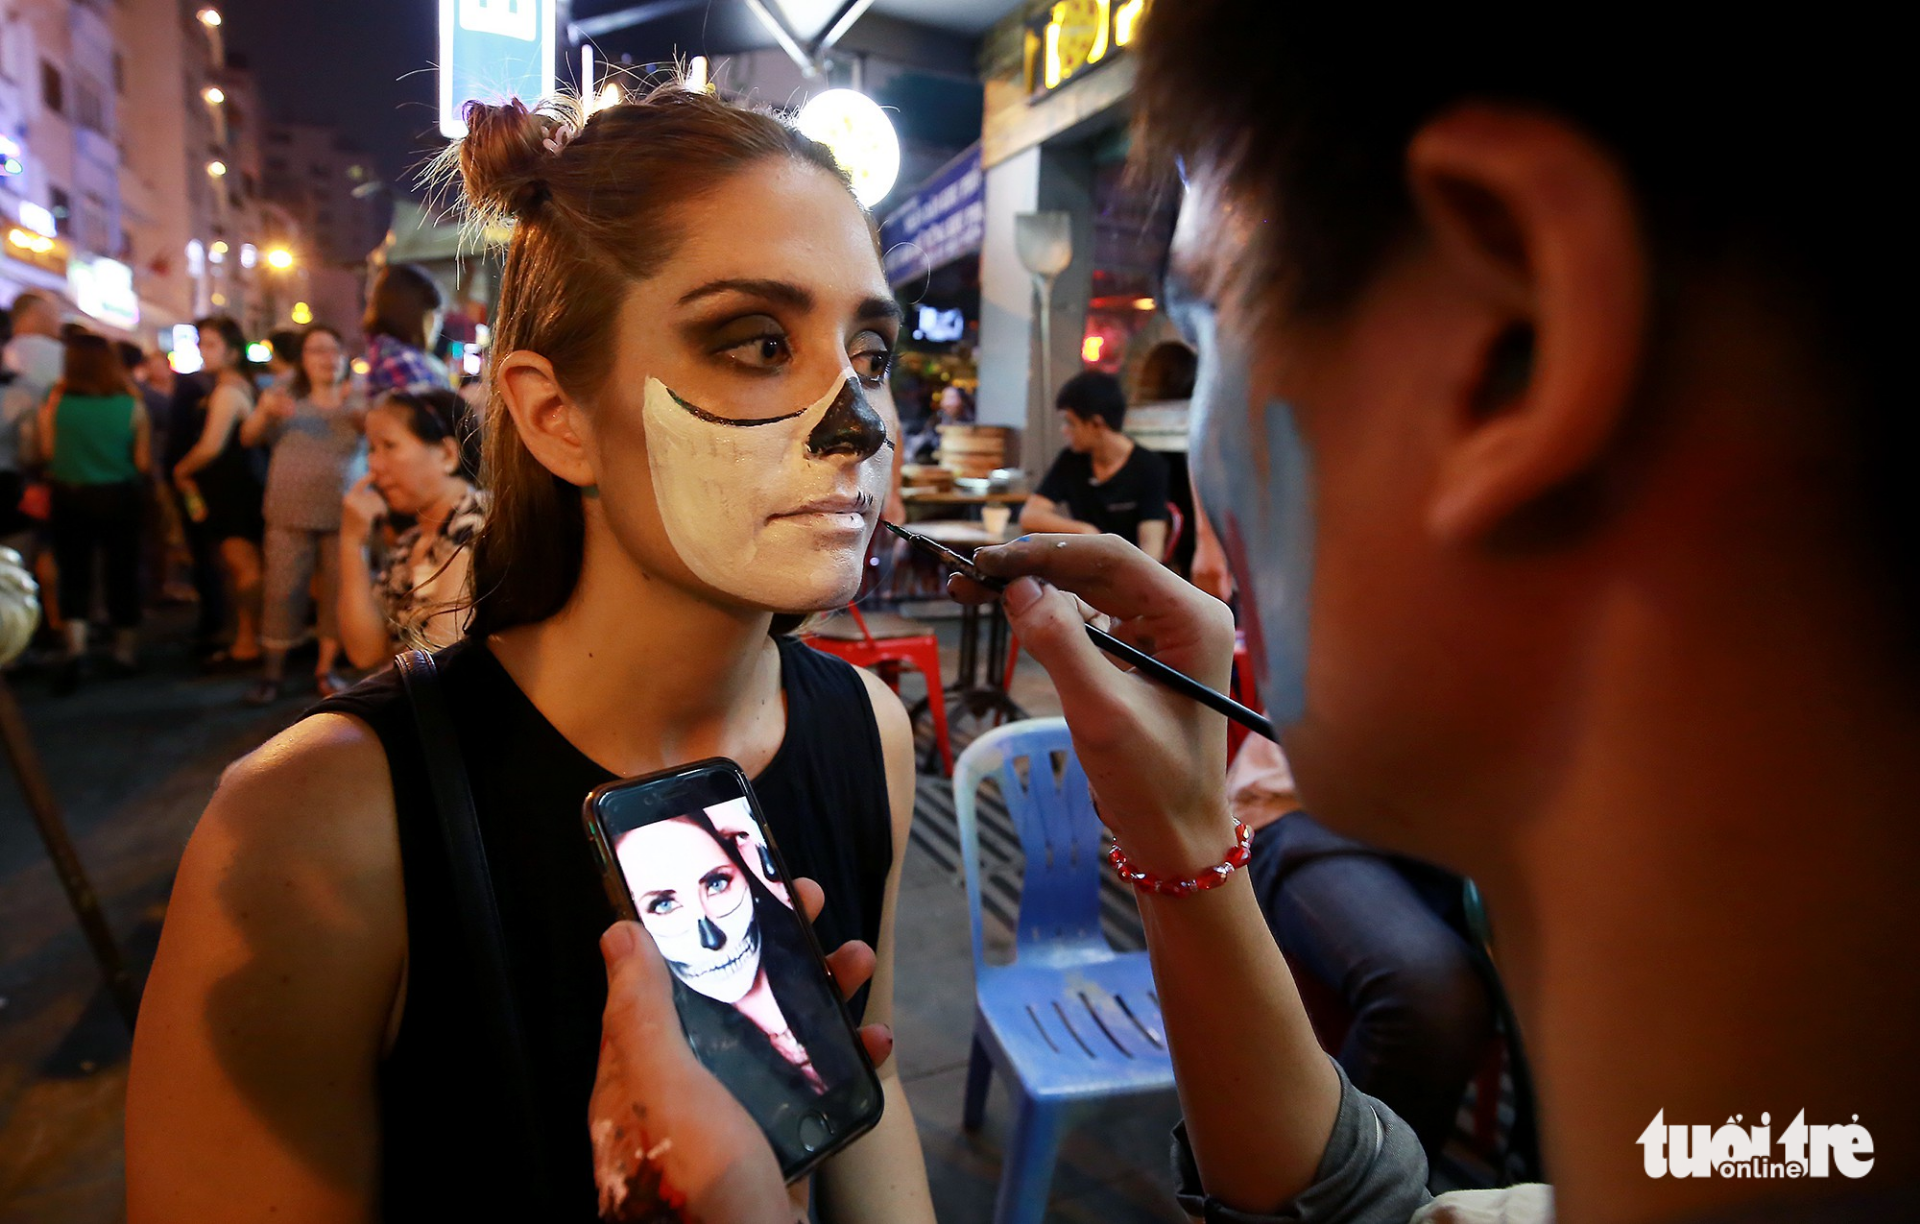 Face painting services are offered from VND50,000 ($2.21) to VND100,000 ($4.41) per person.